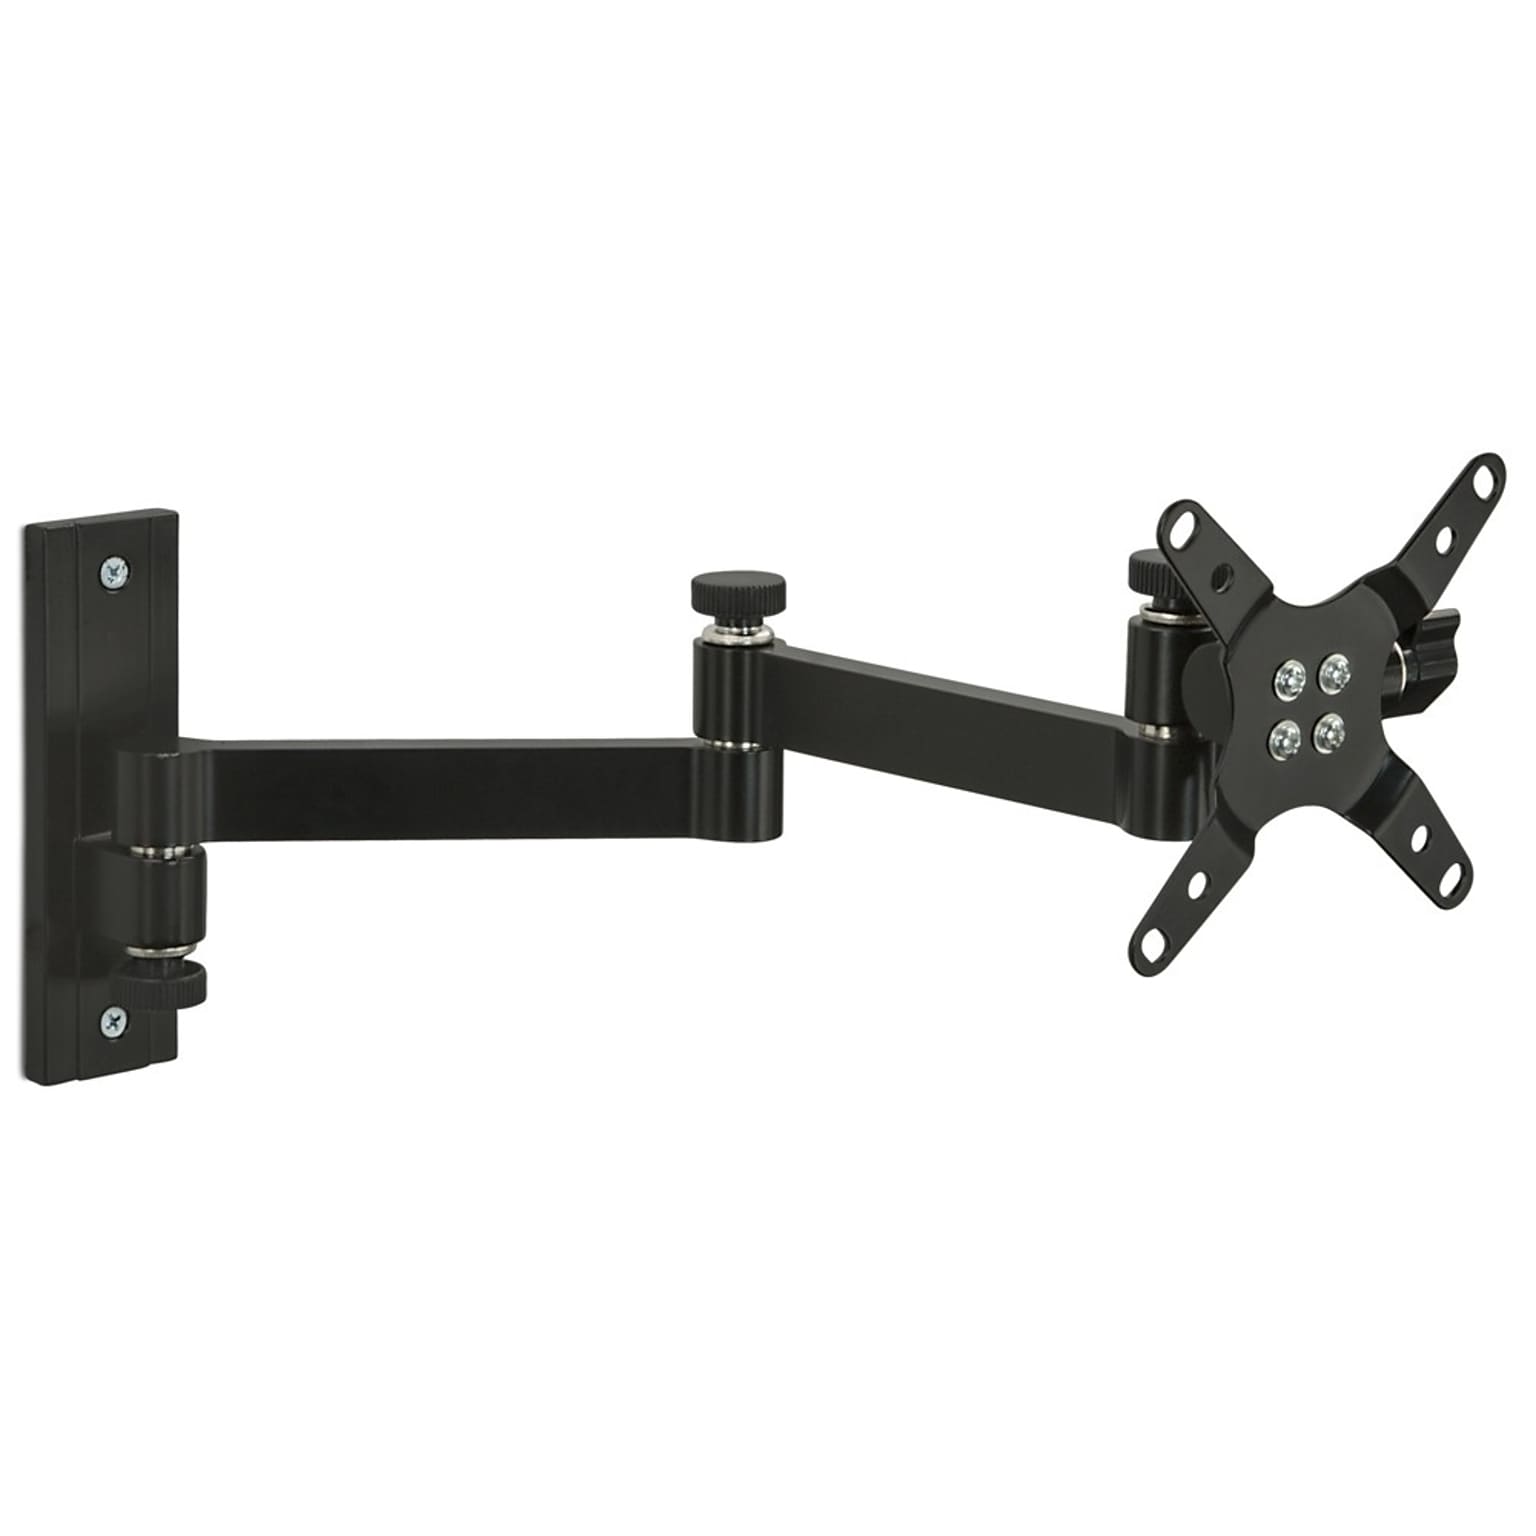 Mount-It! Full-Motion Single Monitor Wall Arm Mount, Up to 30, Black (MI-404)